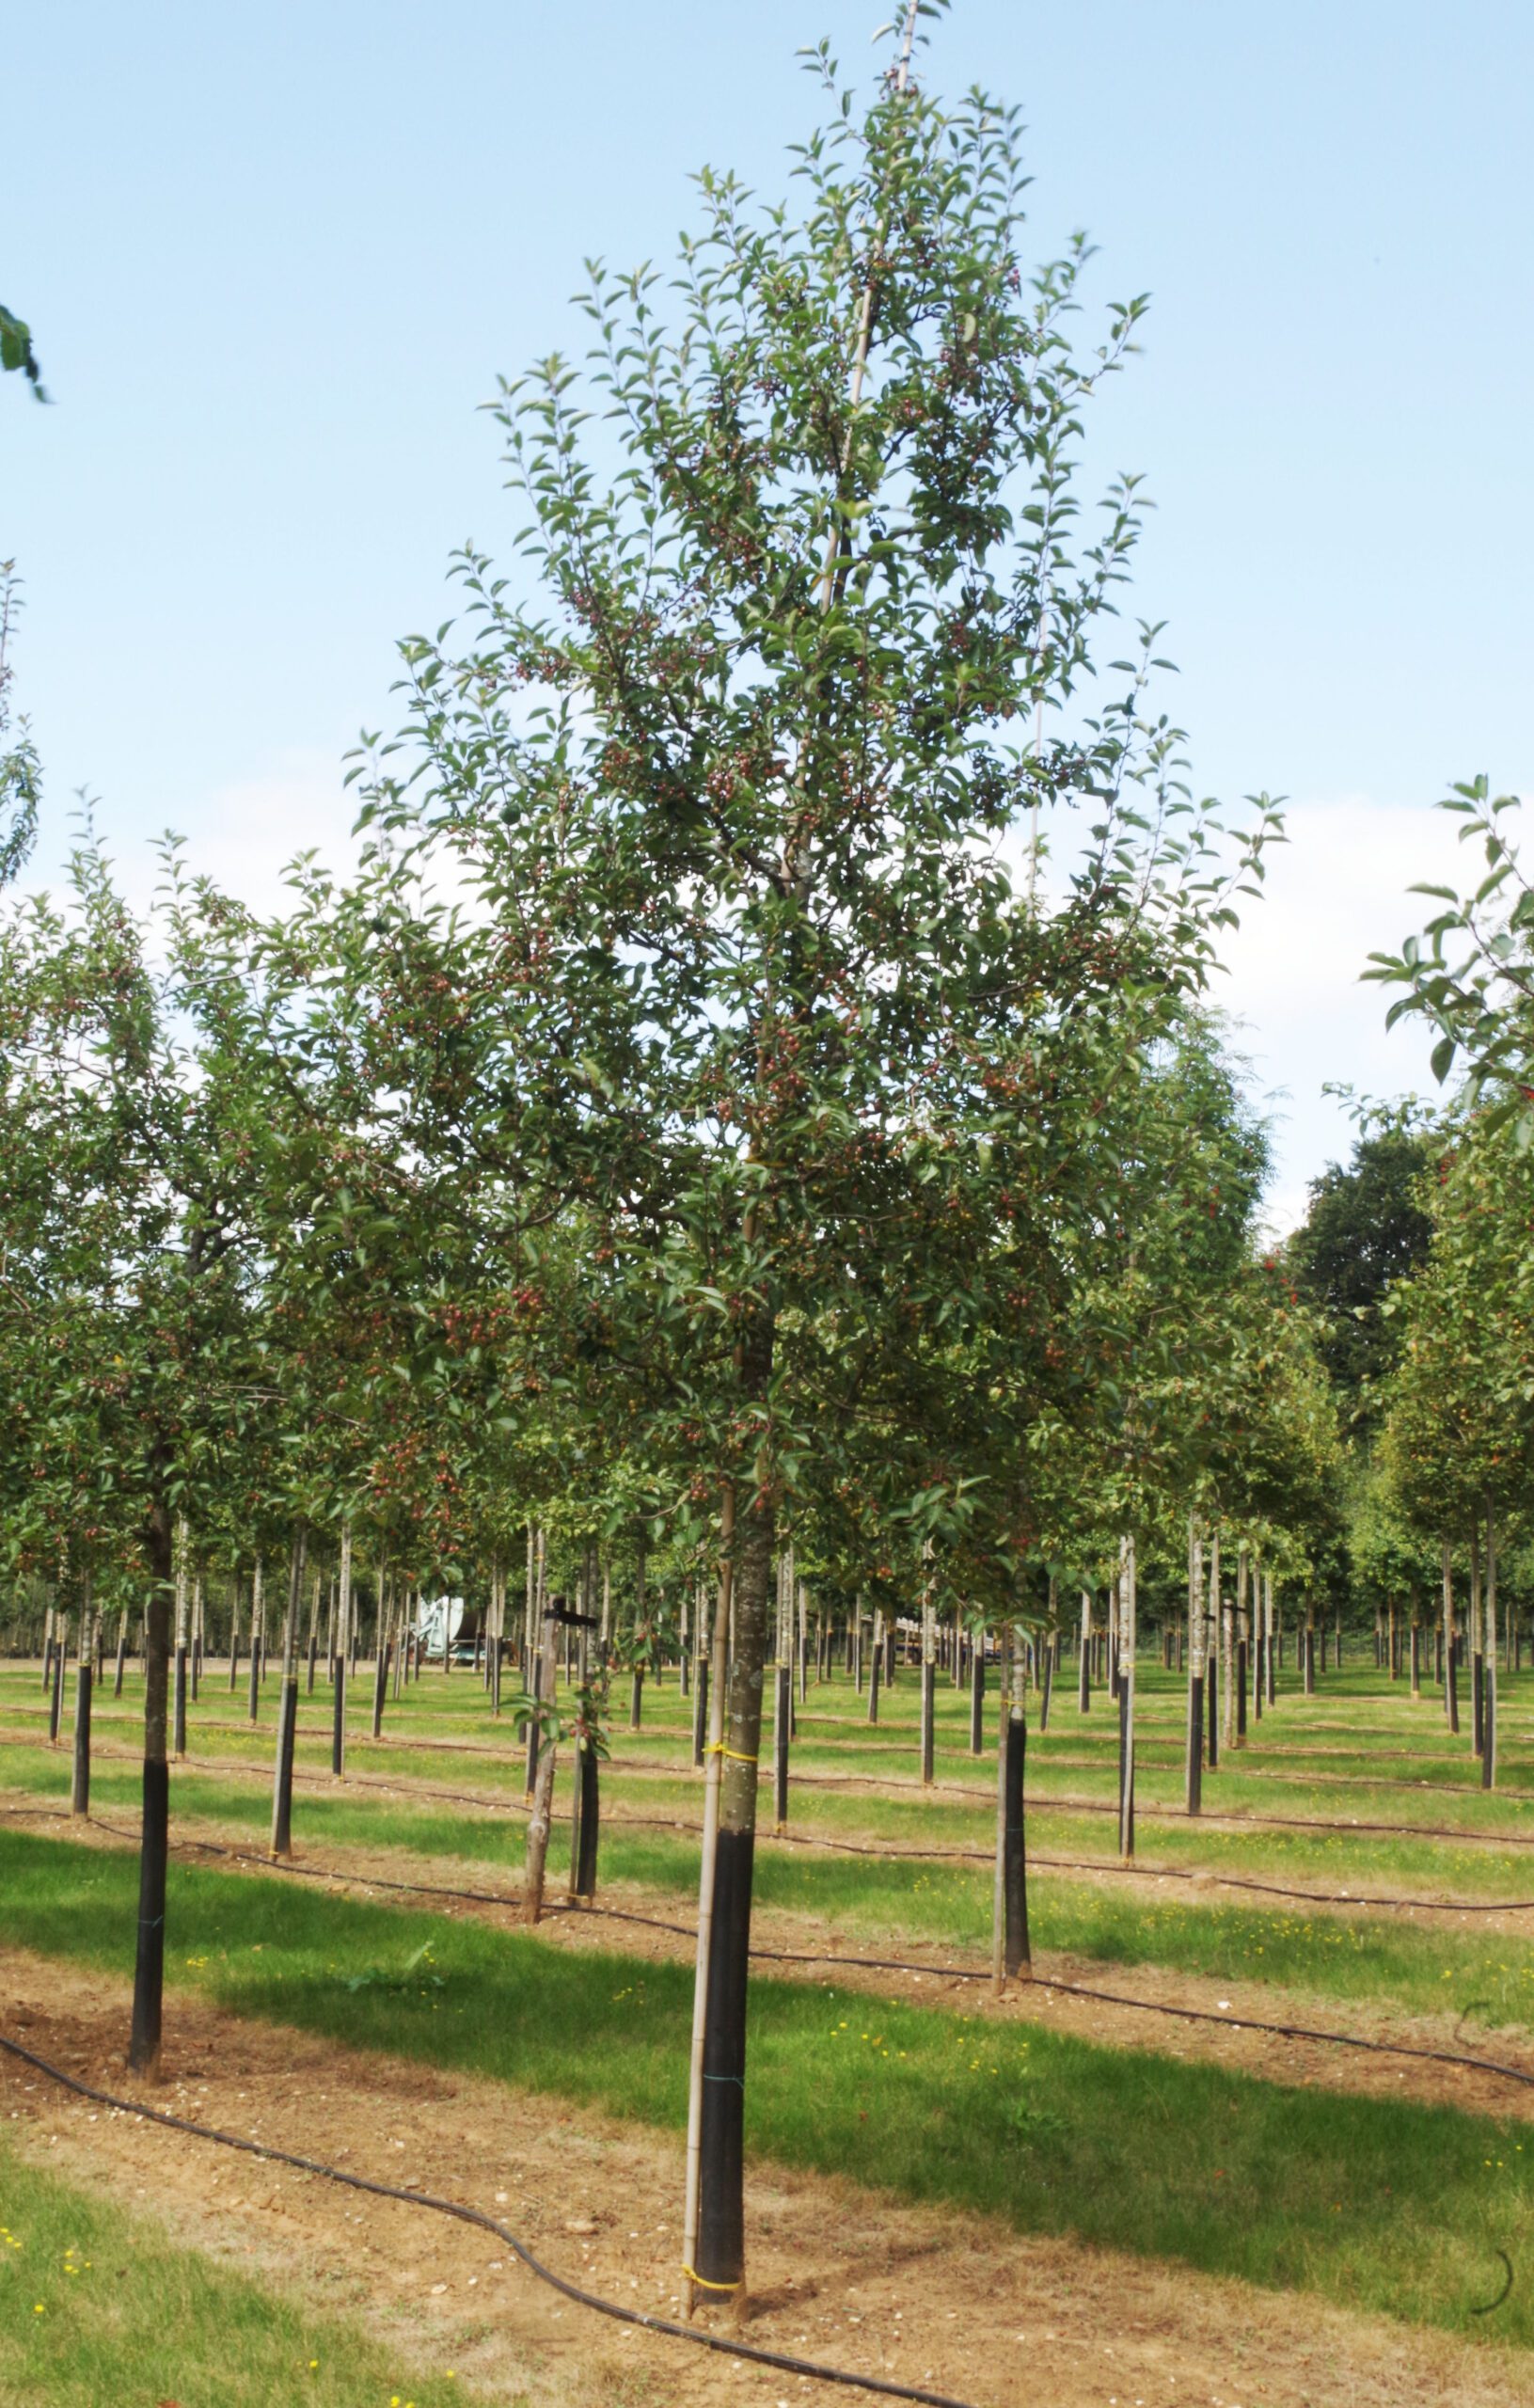 Malus hupehensis semi mature trees growing in a field